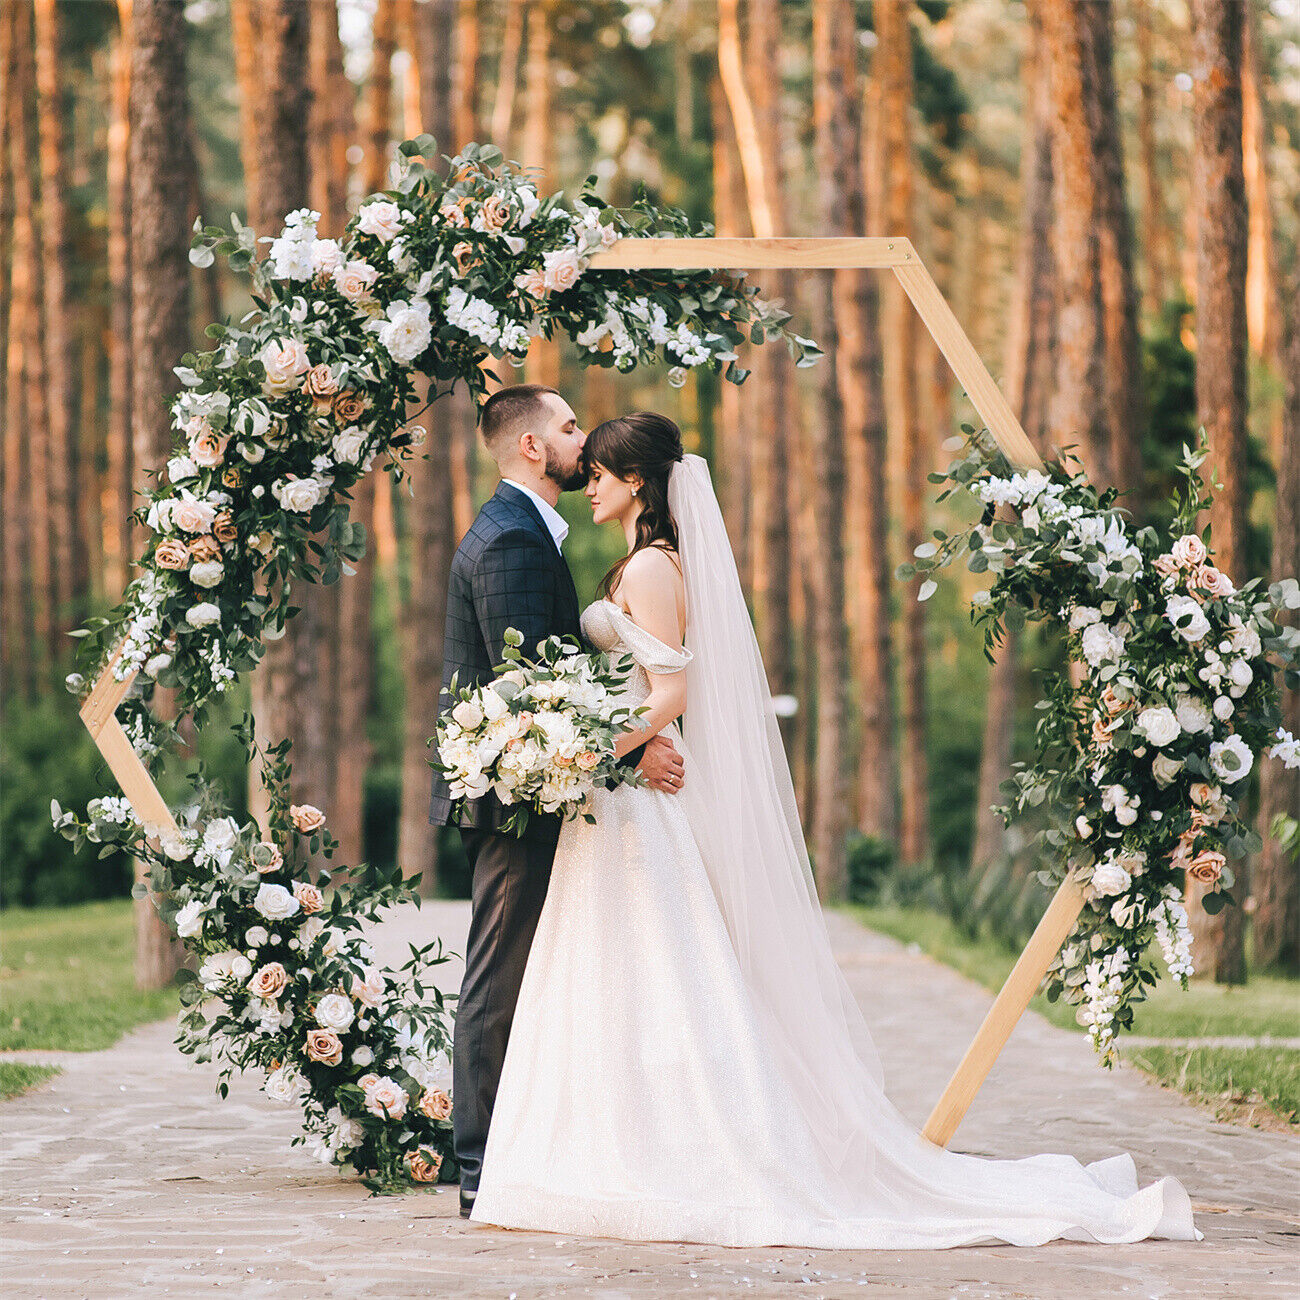  7.5FTx6.5FT Wood Wedding Arch for Ceremony Arbor Backdrop Stand Indoor Outdoor